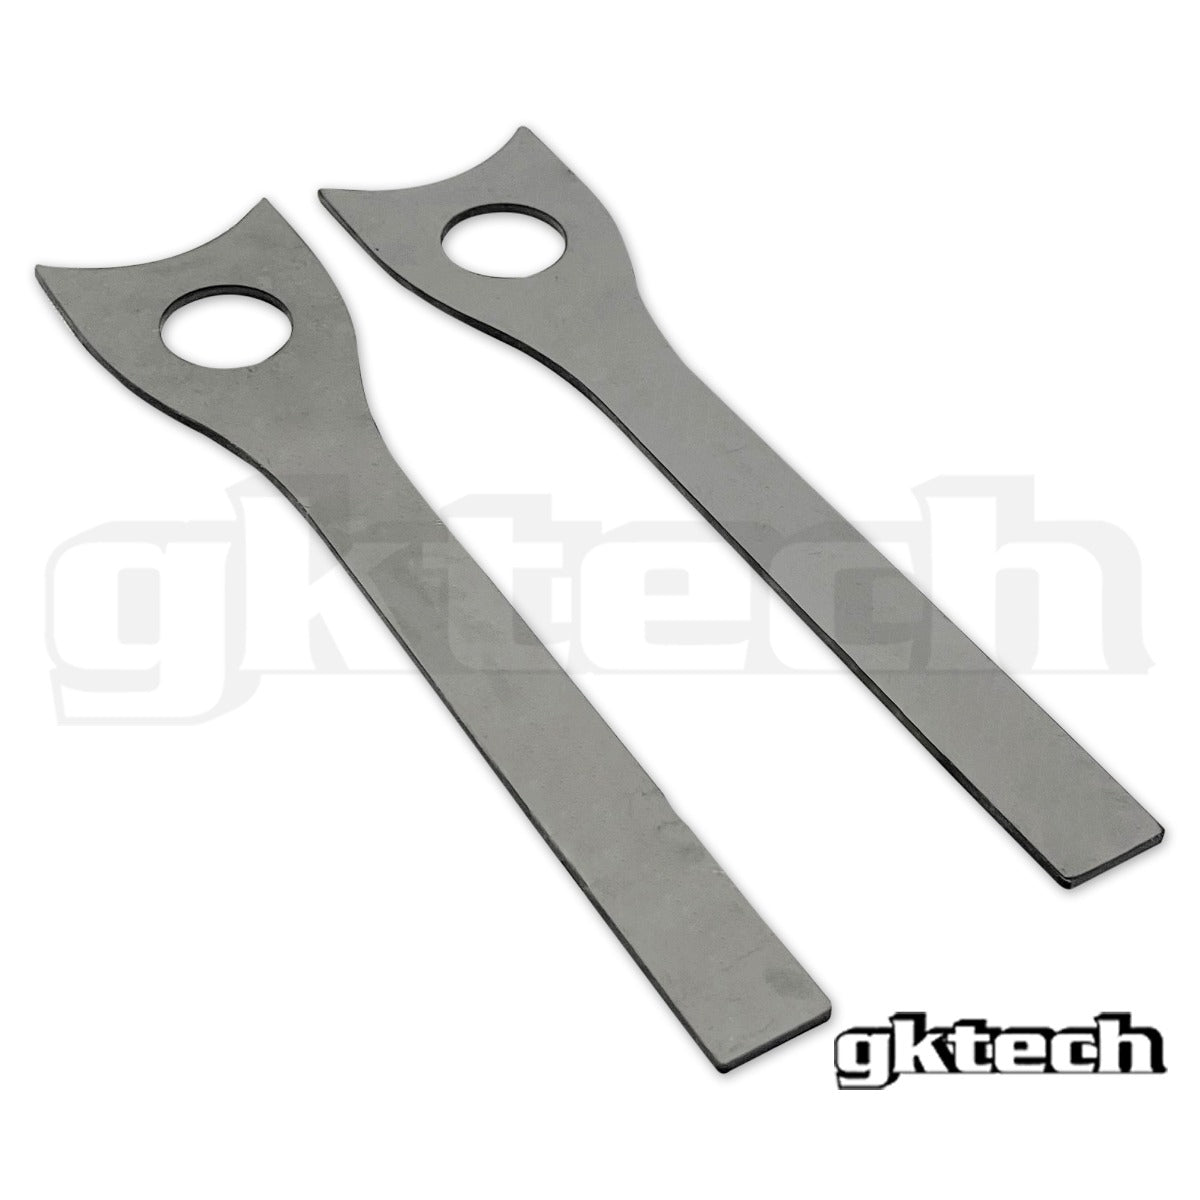 S13 240sx/Silvia rear traction arm weld in reinforcement plates